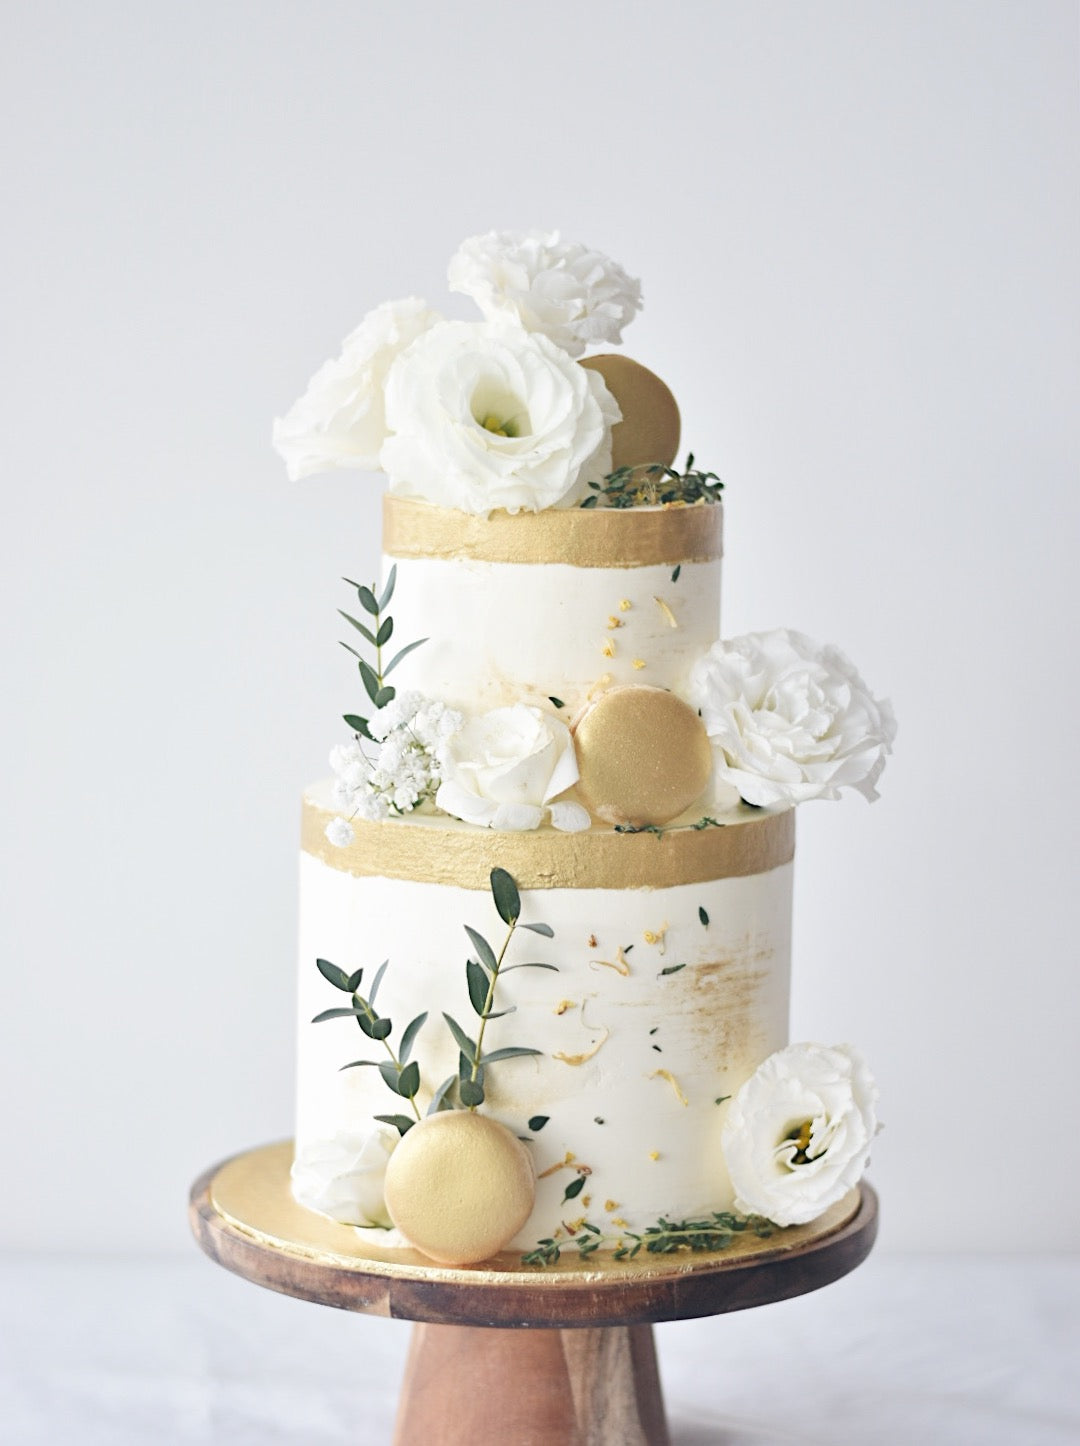 White and gold cake with flowers - zeeandelle